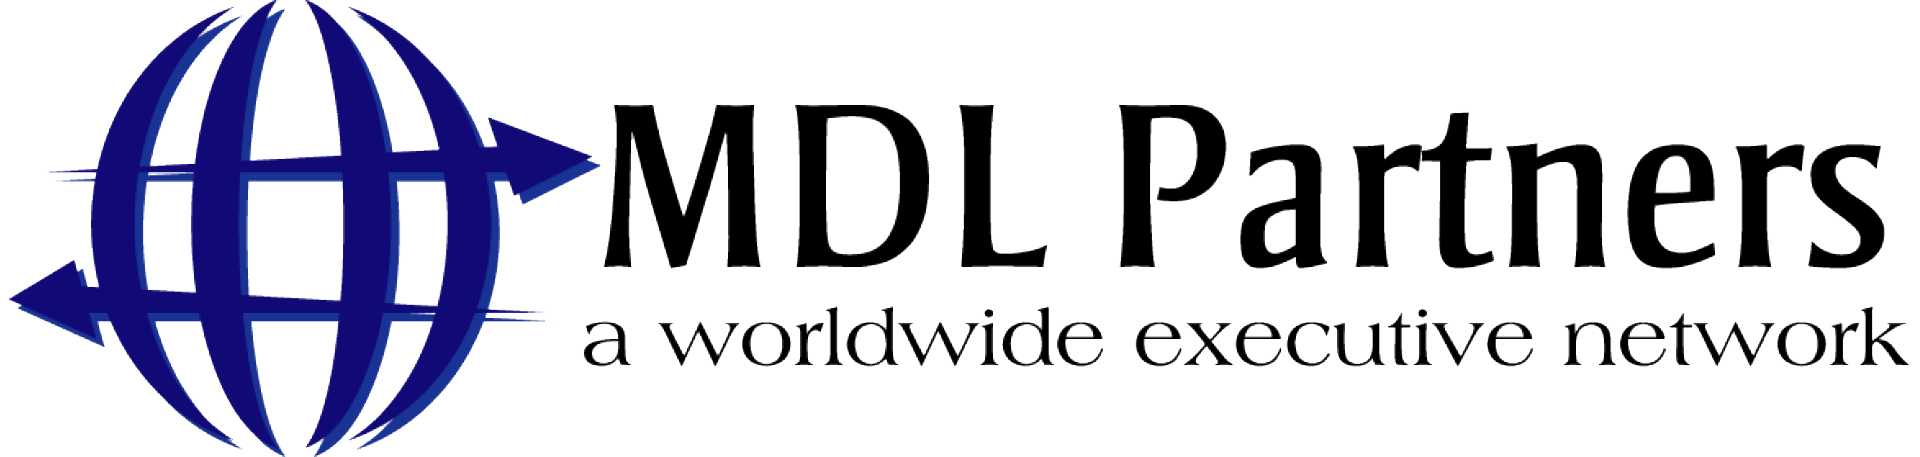 MDL Partners